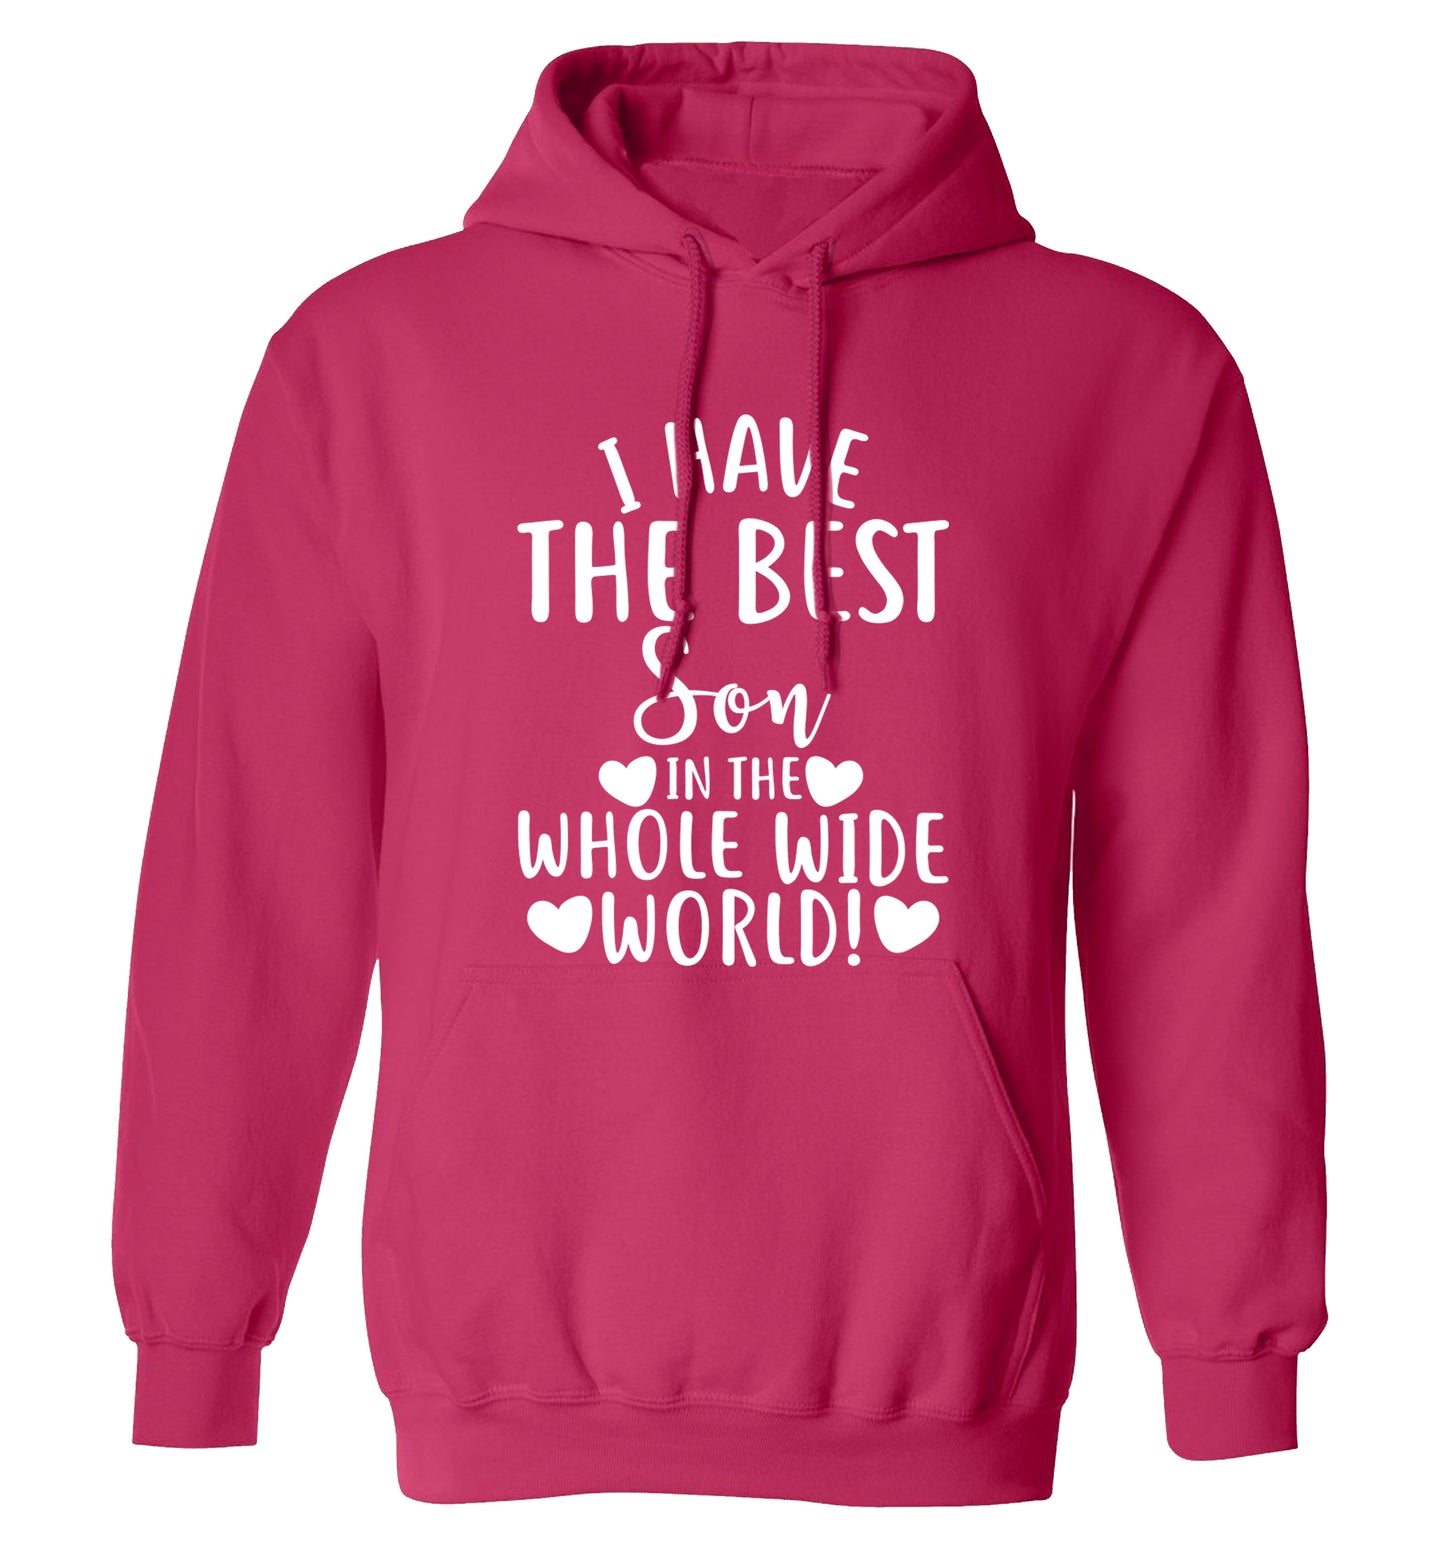 I have the best son in the whole wide world! adults unisex pink hoodie 2XL